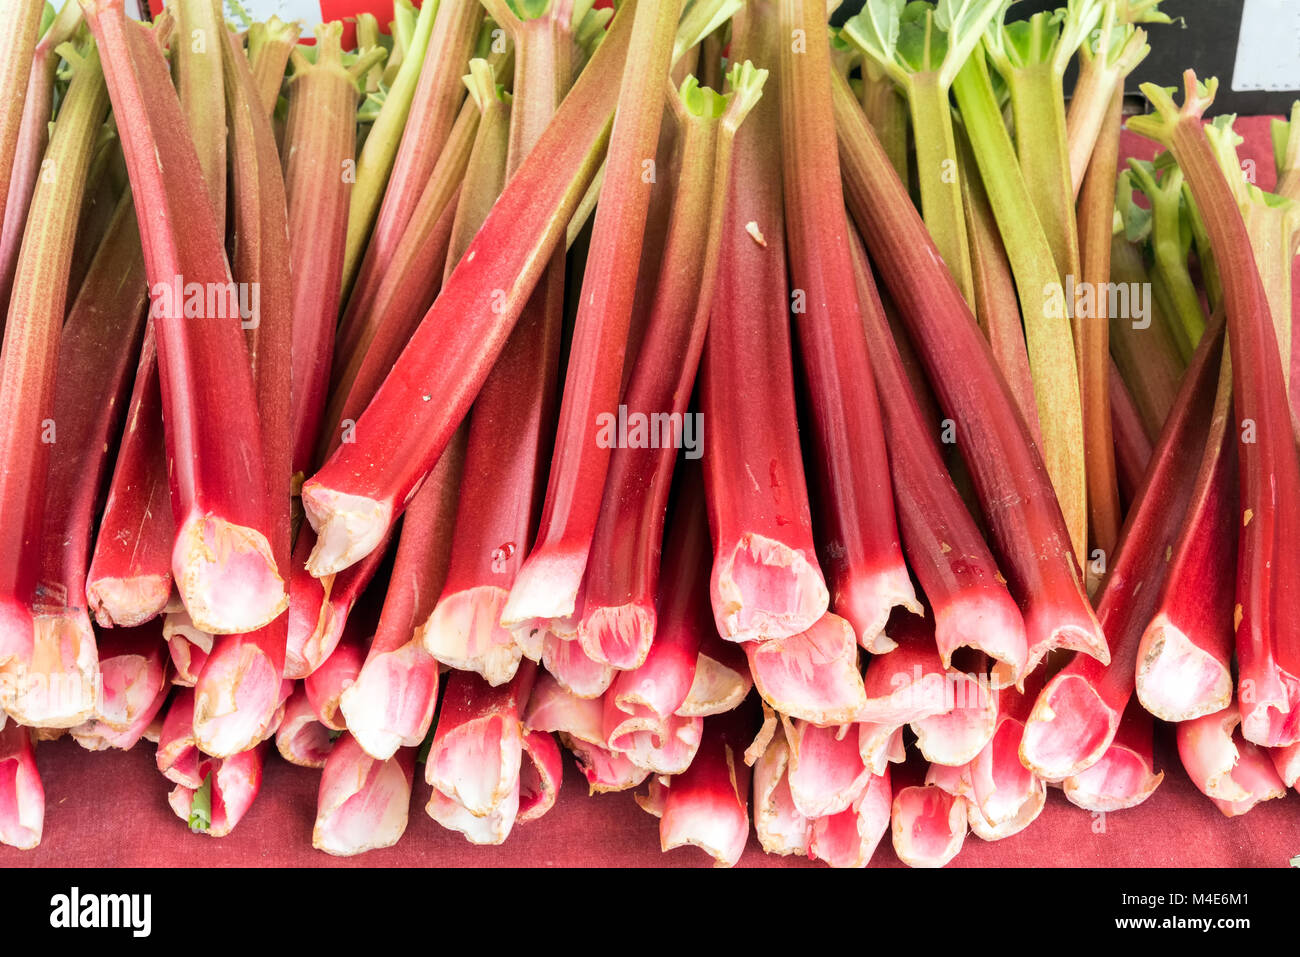 Fresh rhubarb for sale at a market Stock Photo